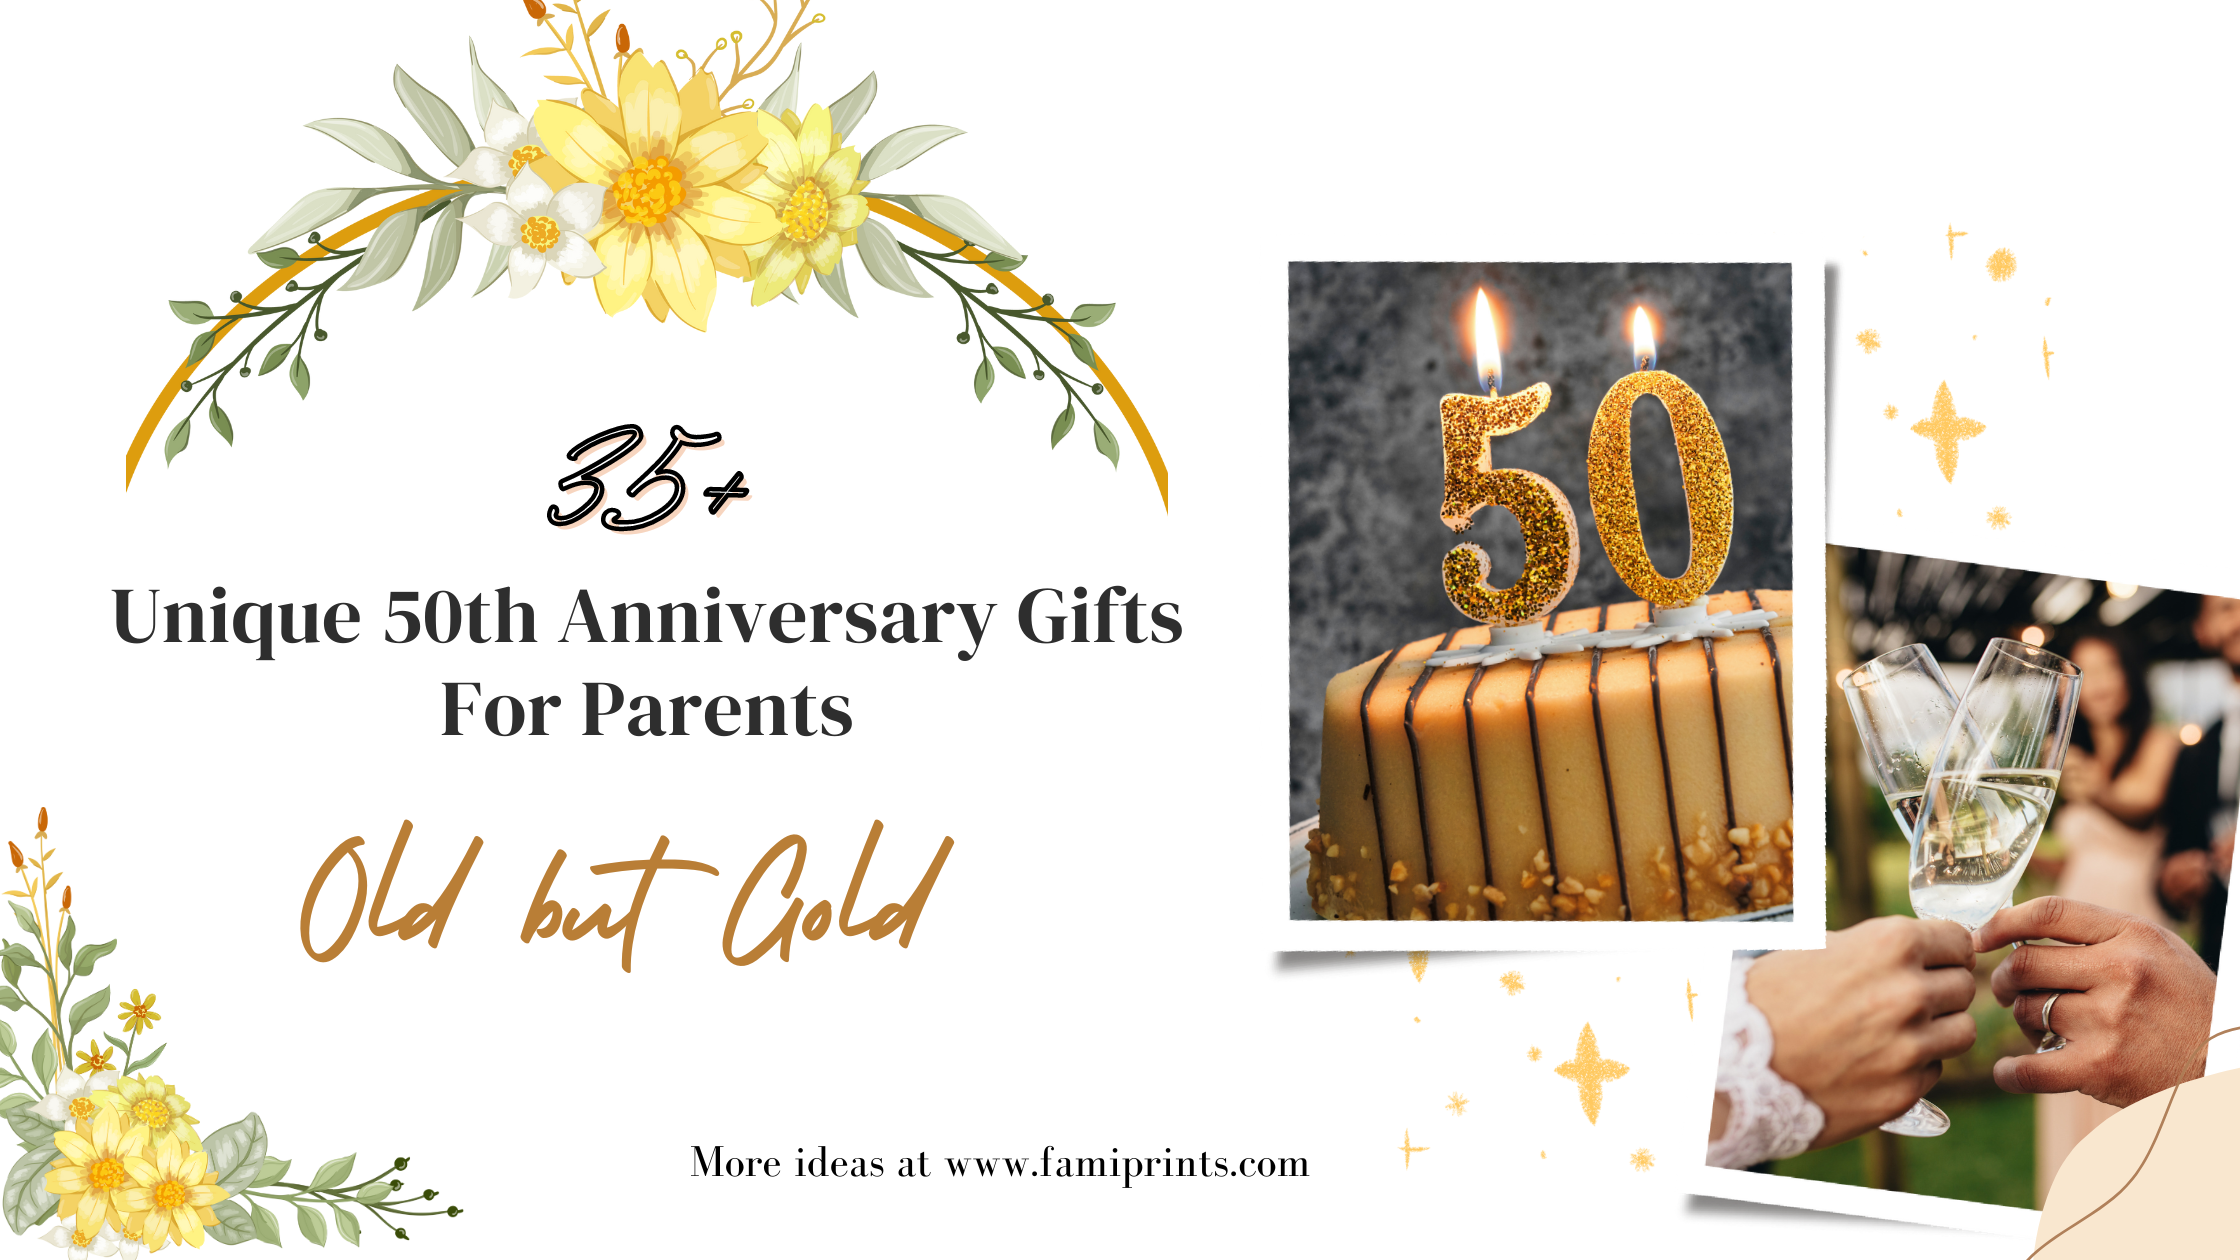 Meaningful Gifts for your parents – they'll love these gifts! - Your Modern  Family